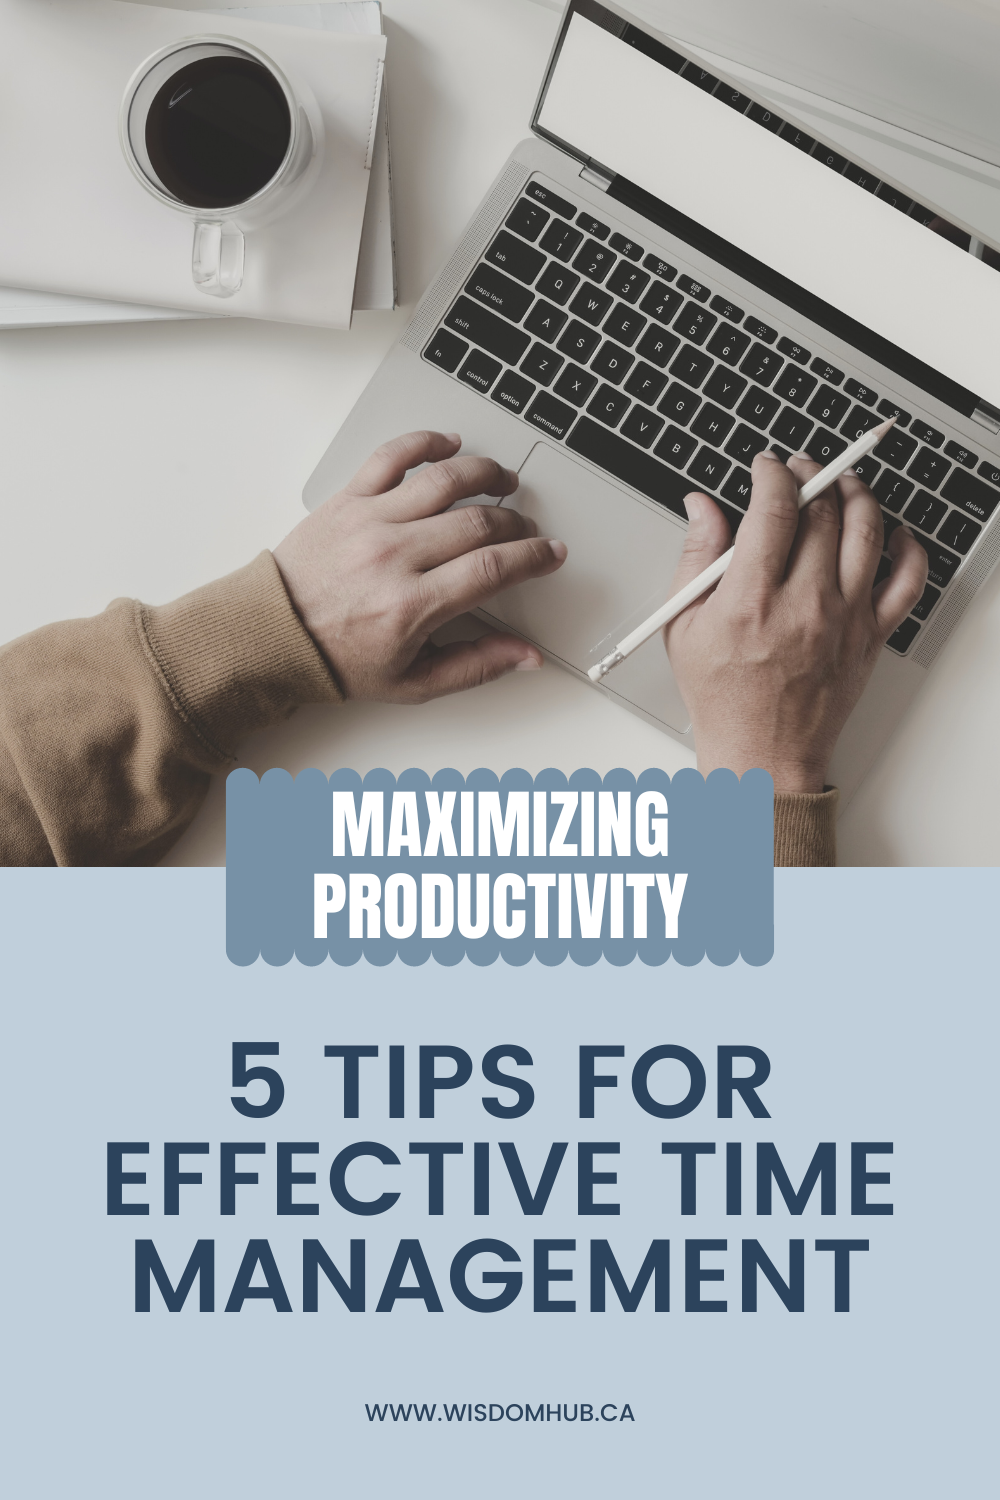 Maximizing Productivity: 5 Tips for Effective Time Management